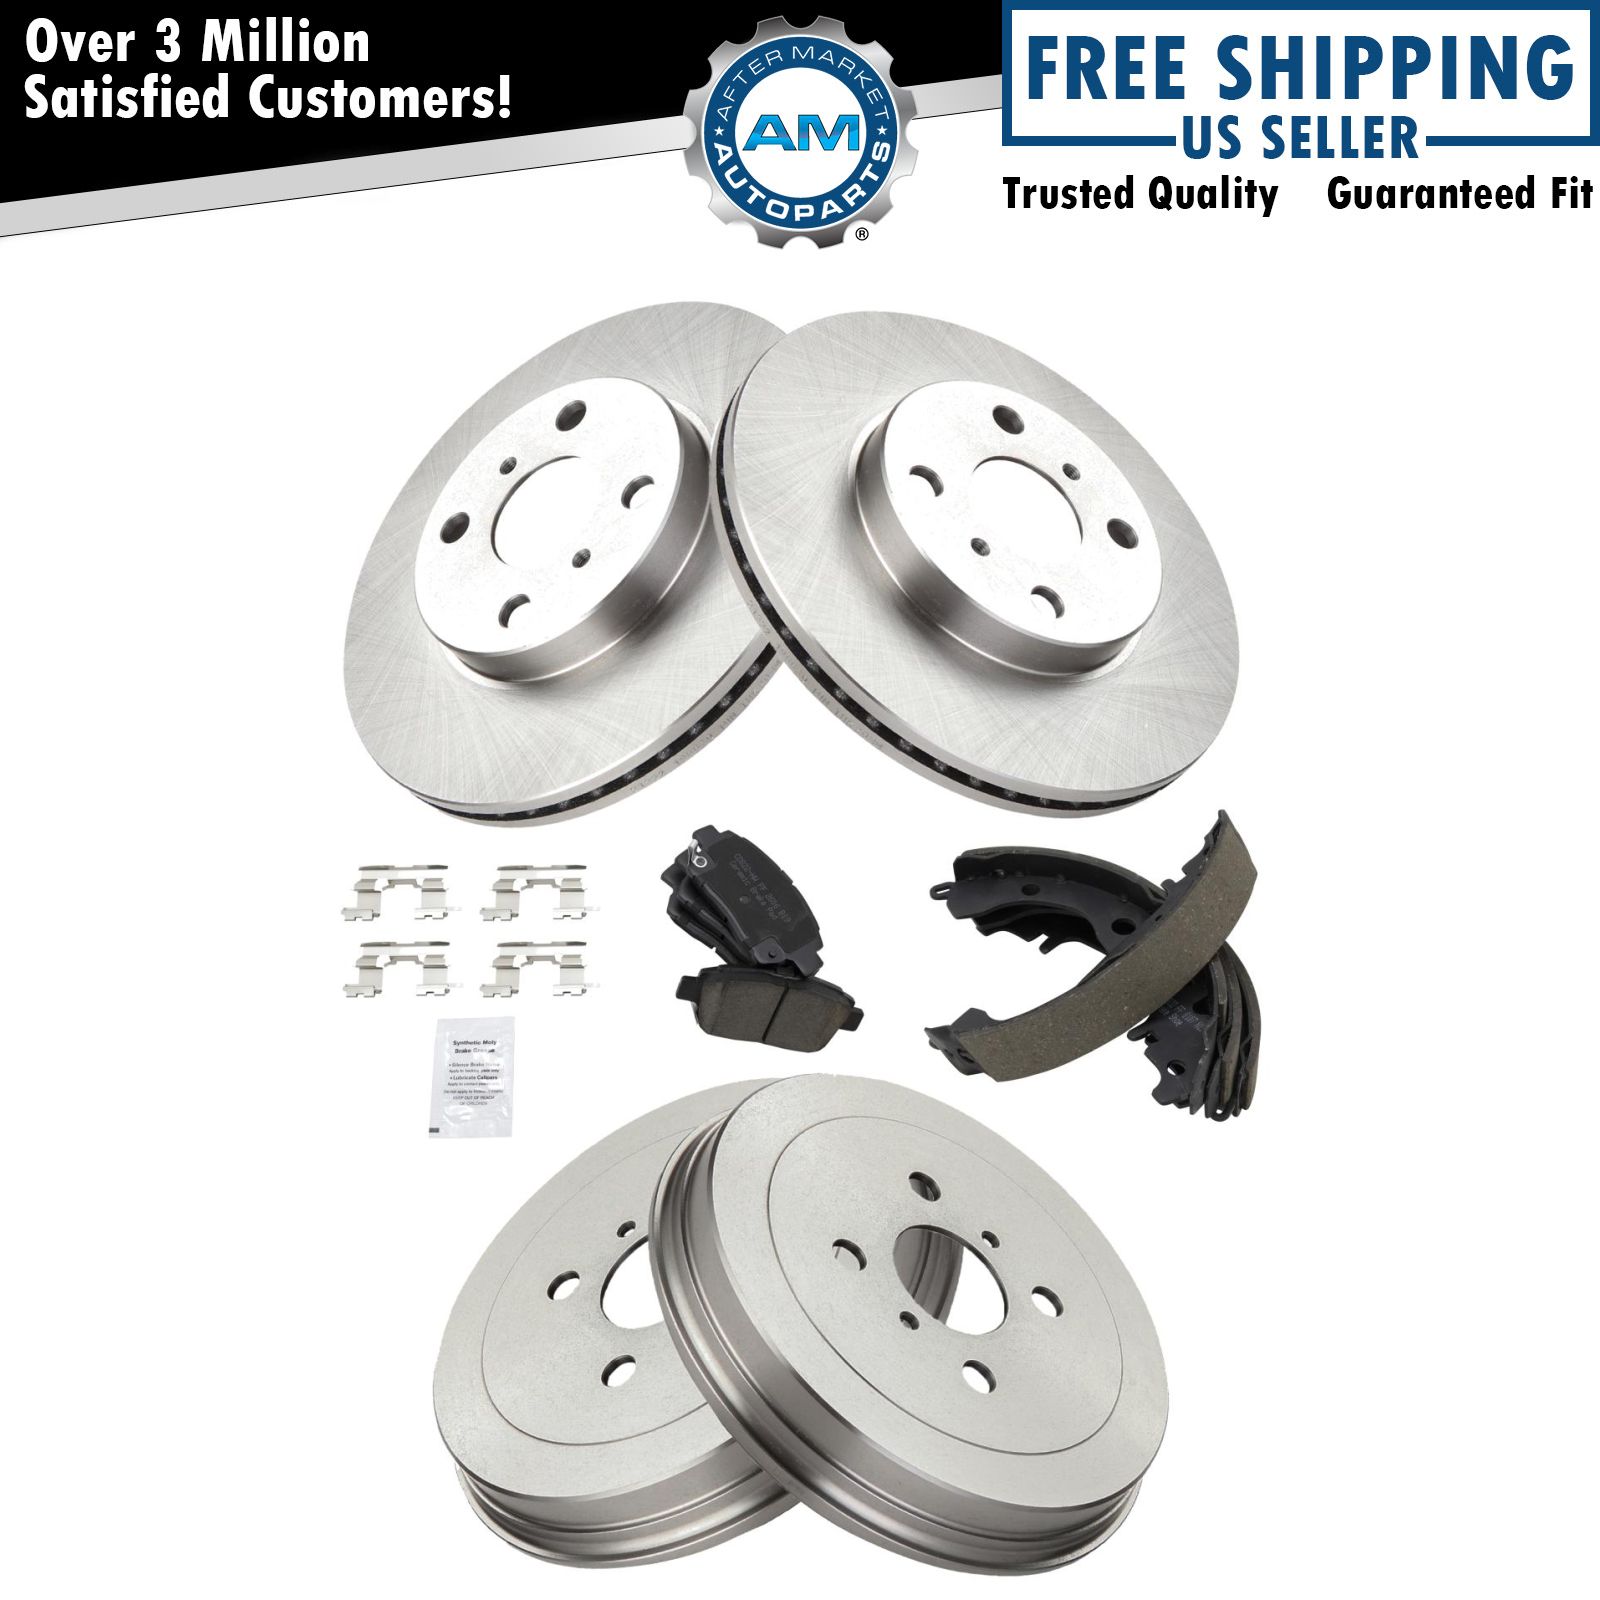 Front Ceramic Disc Brake Pads & Rotors w/ Rear Shoes & Drums for Scion xA xB